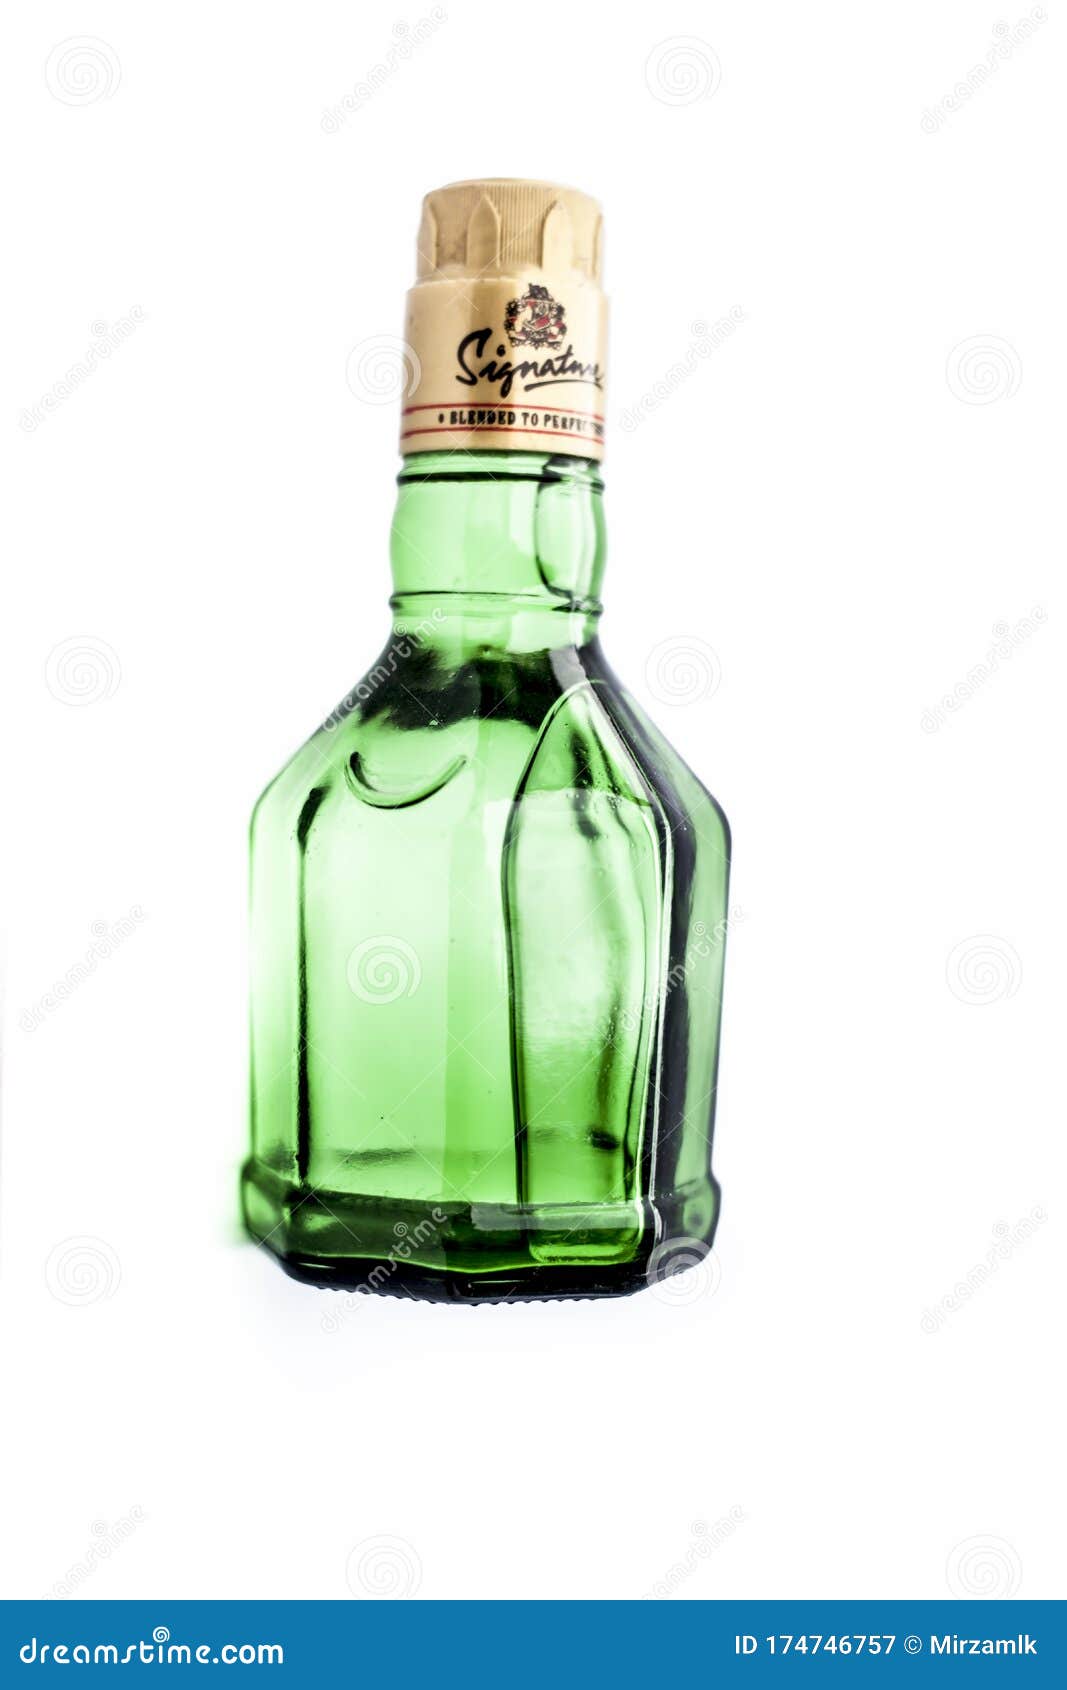 Download 169 Full Whiskey Bottle Green Photos Free Royalty Free Stock Photos From Dreamstime Yellowimages Mockups